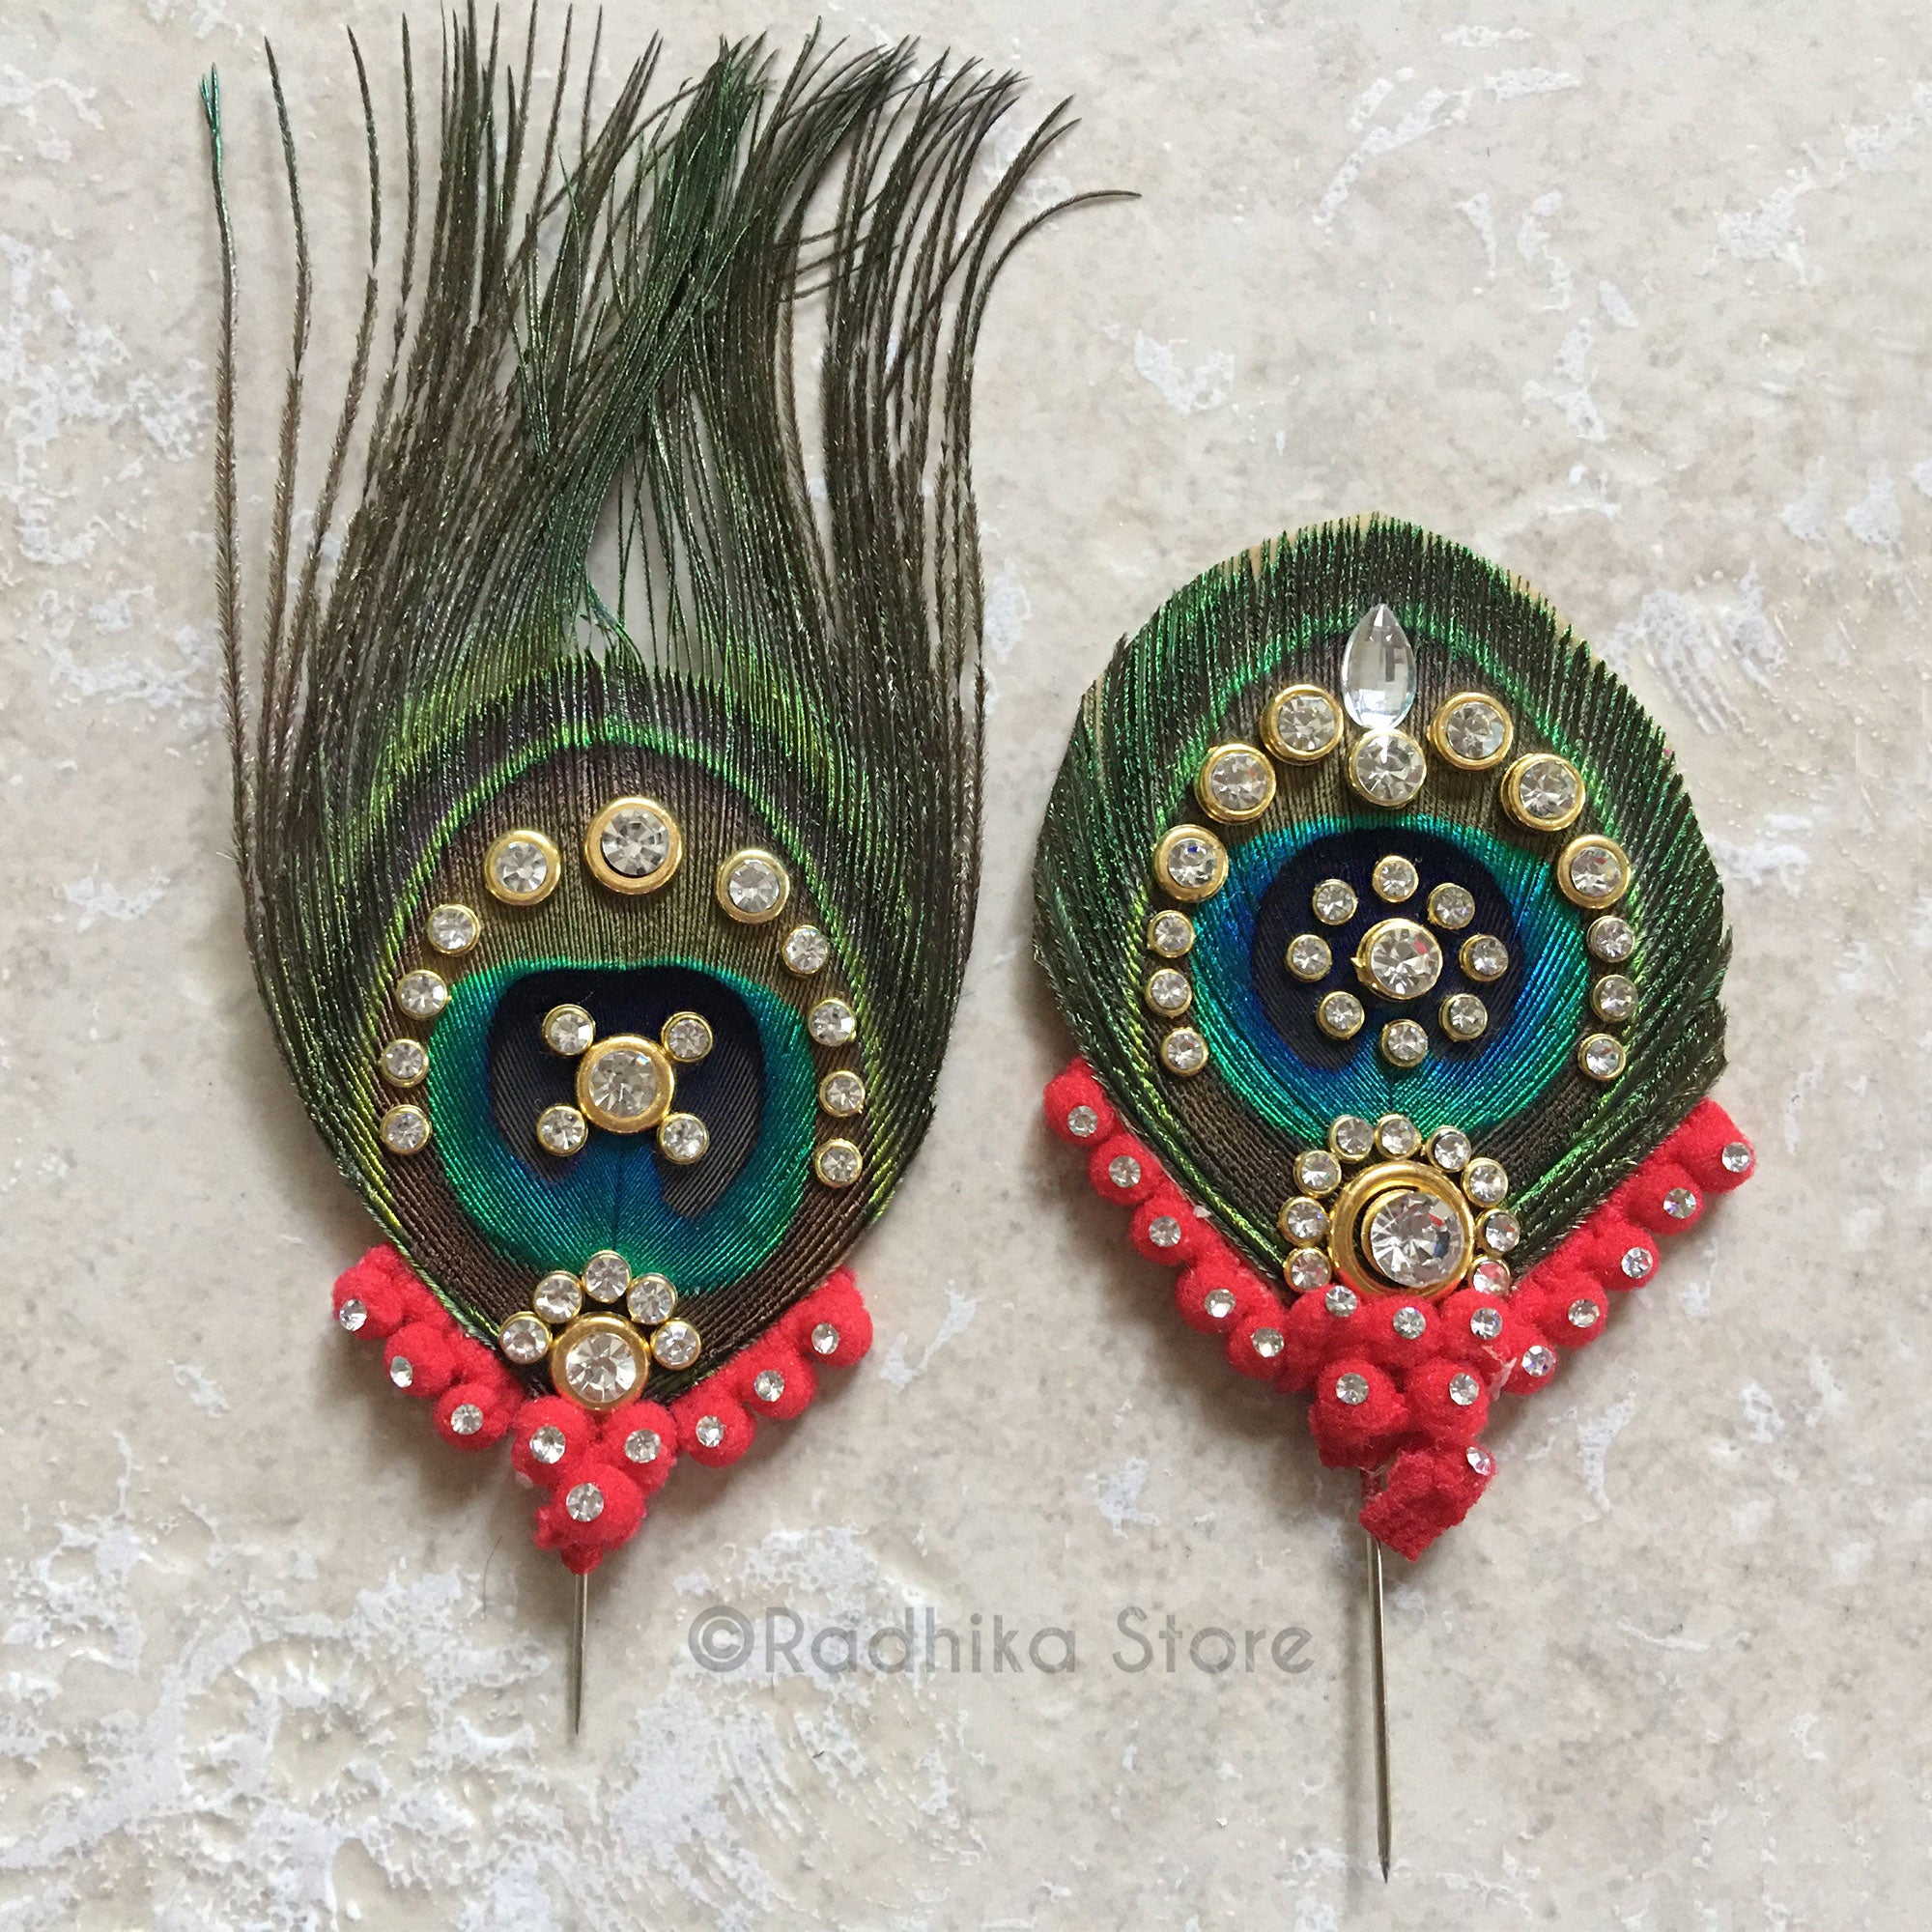 Extra Large Crystal Peacock Feathers - Red Color